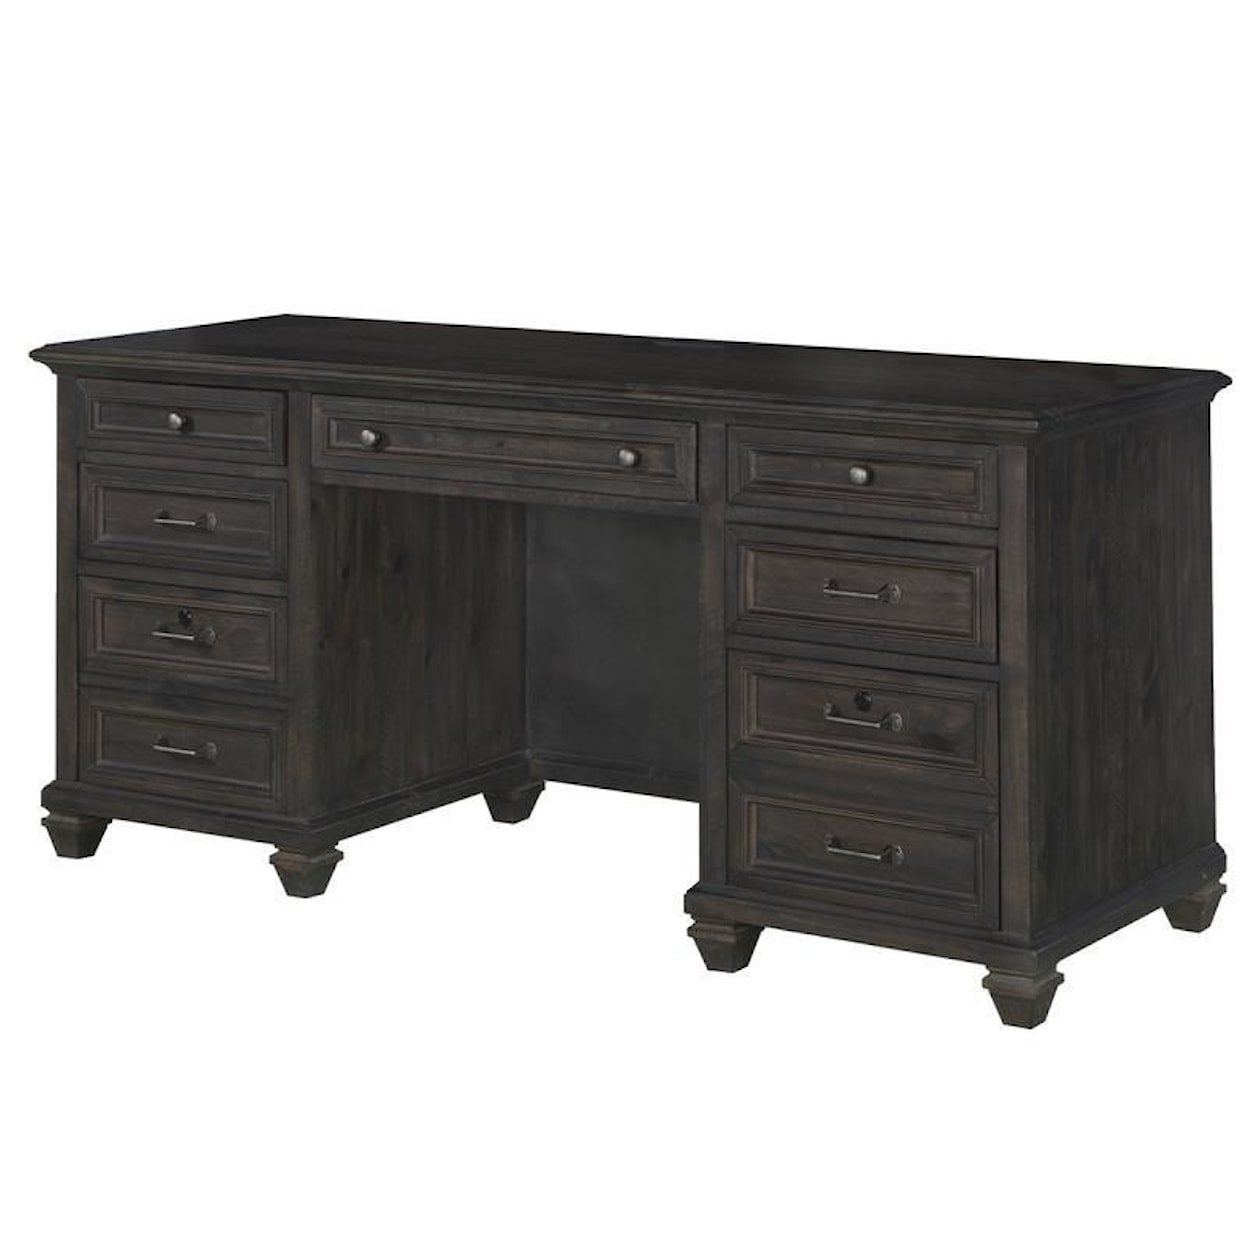 Magnussen Home Sutton Place Home Office Credenza